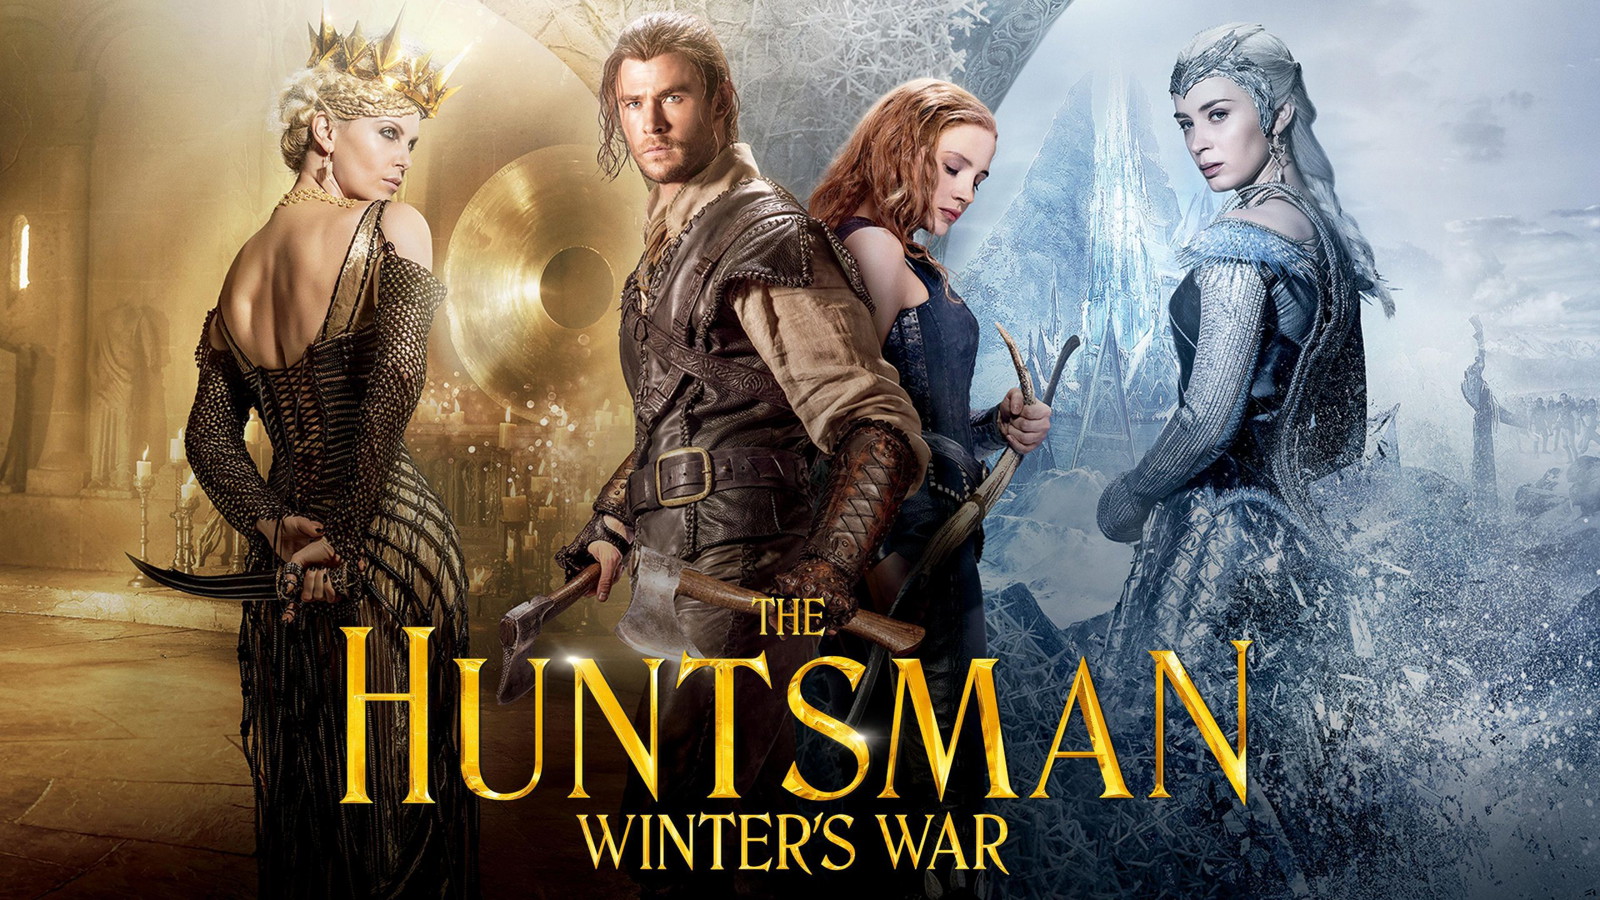 The poster for The Huntsman: Winter's War